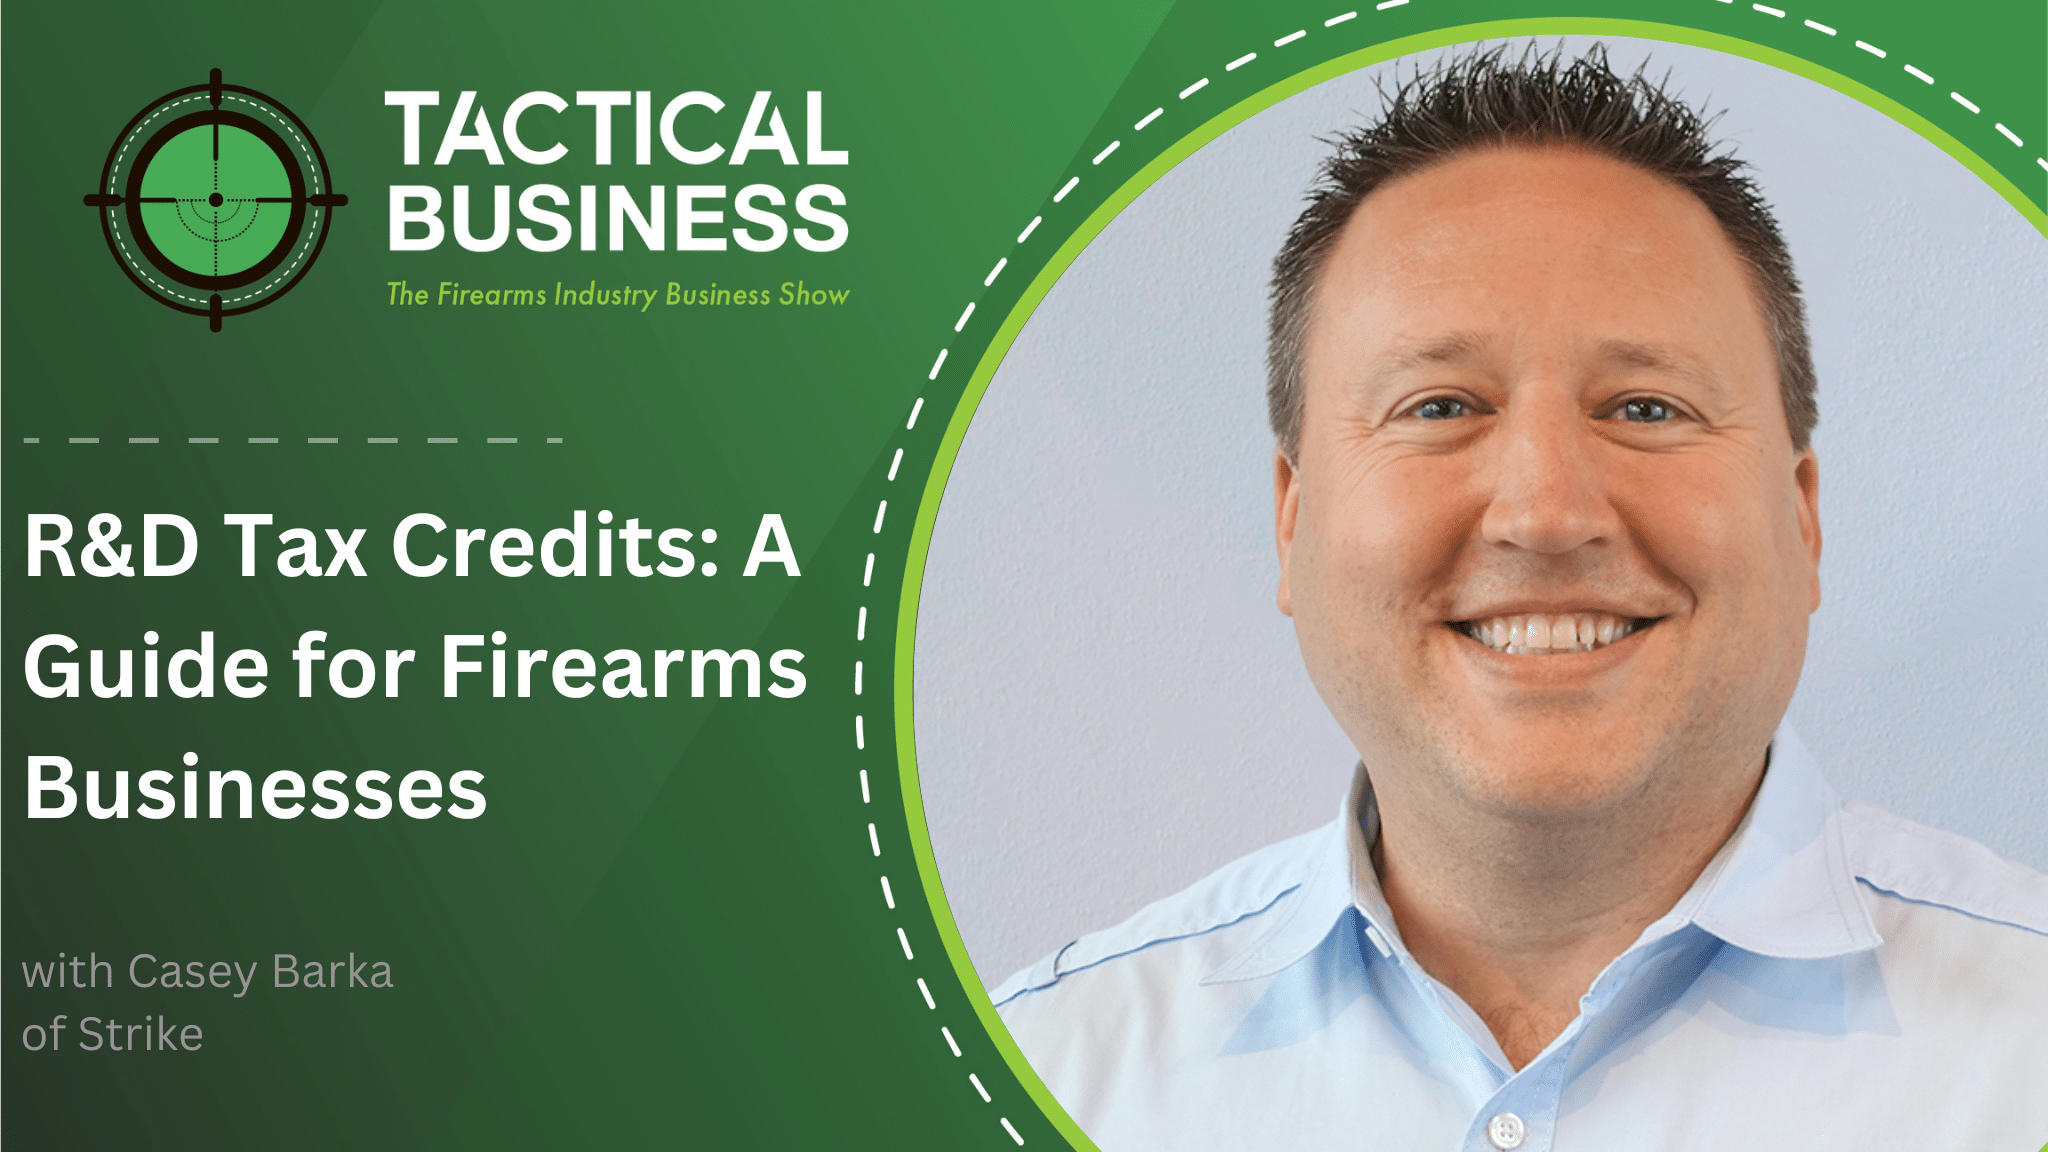 R&D Tax Credits: A Guide for Firearms Businesses with Casey Barka of Strike